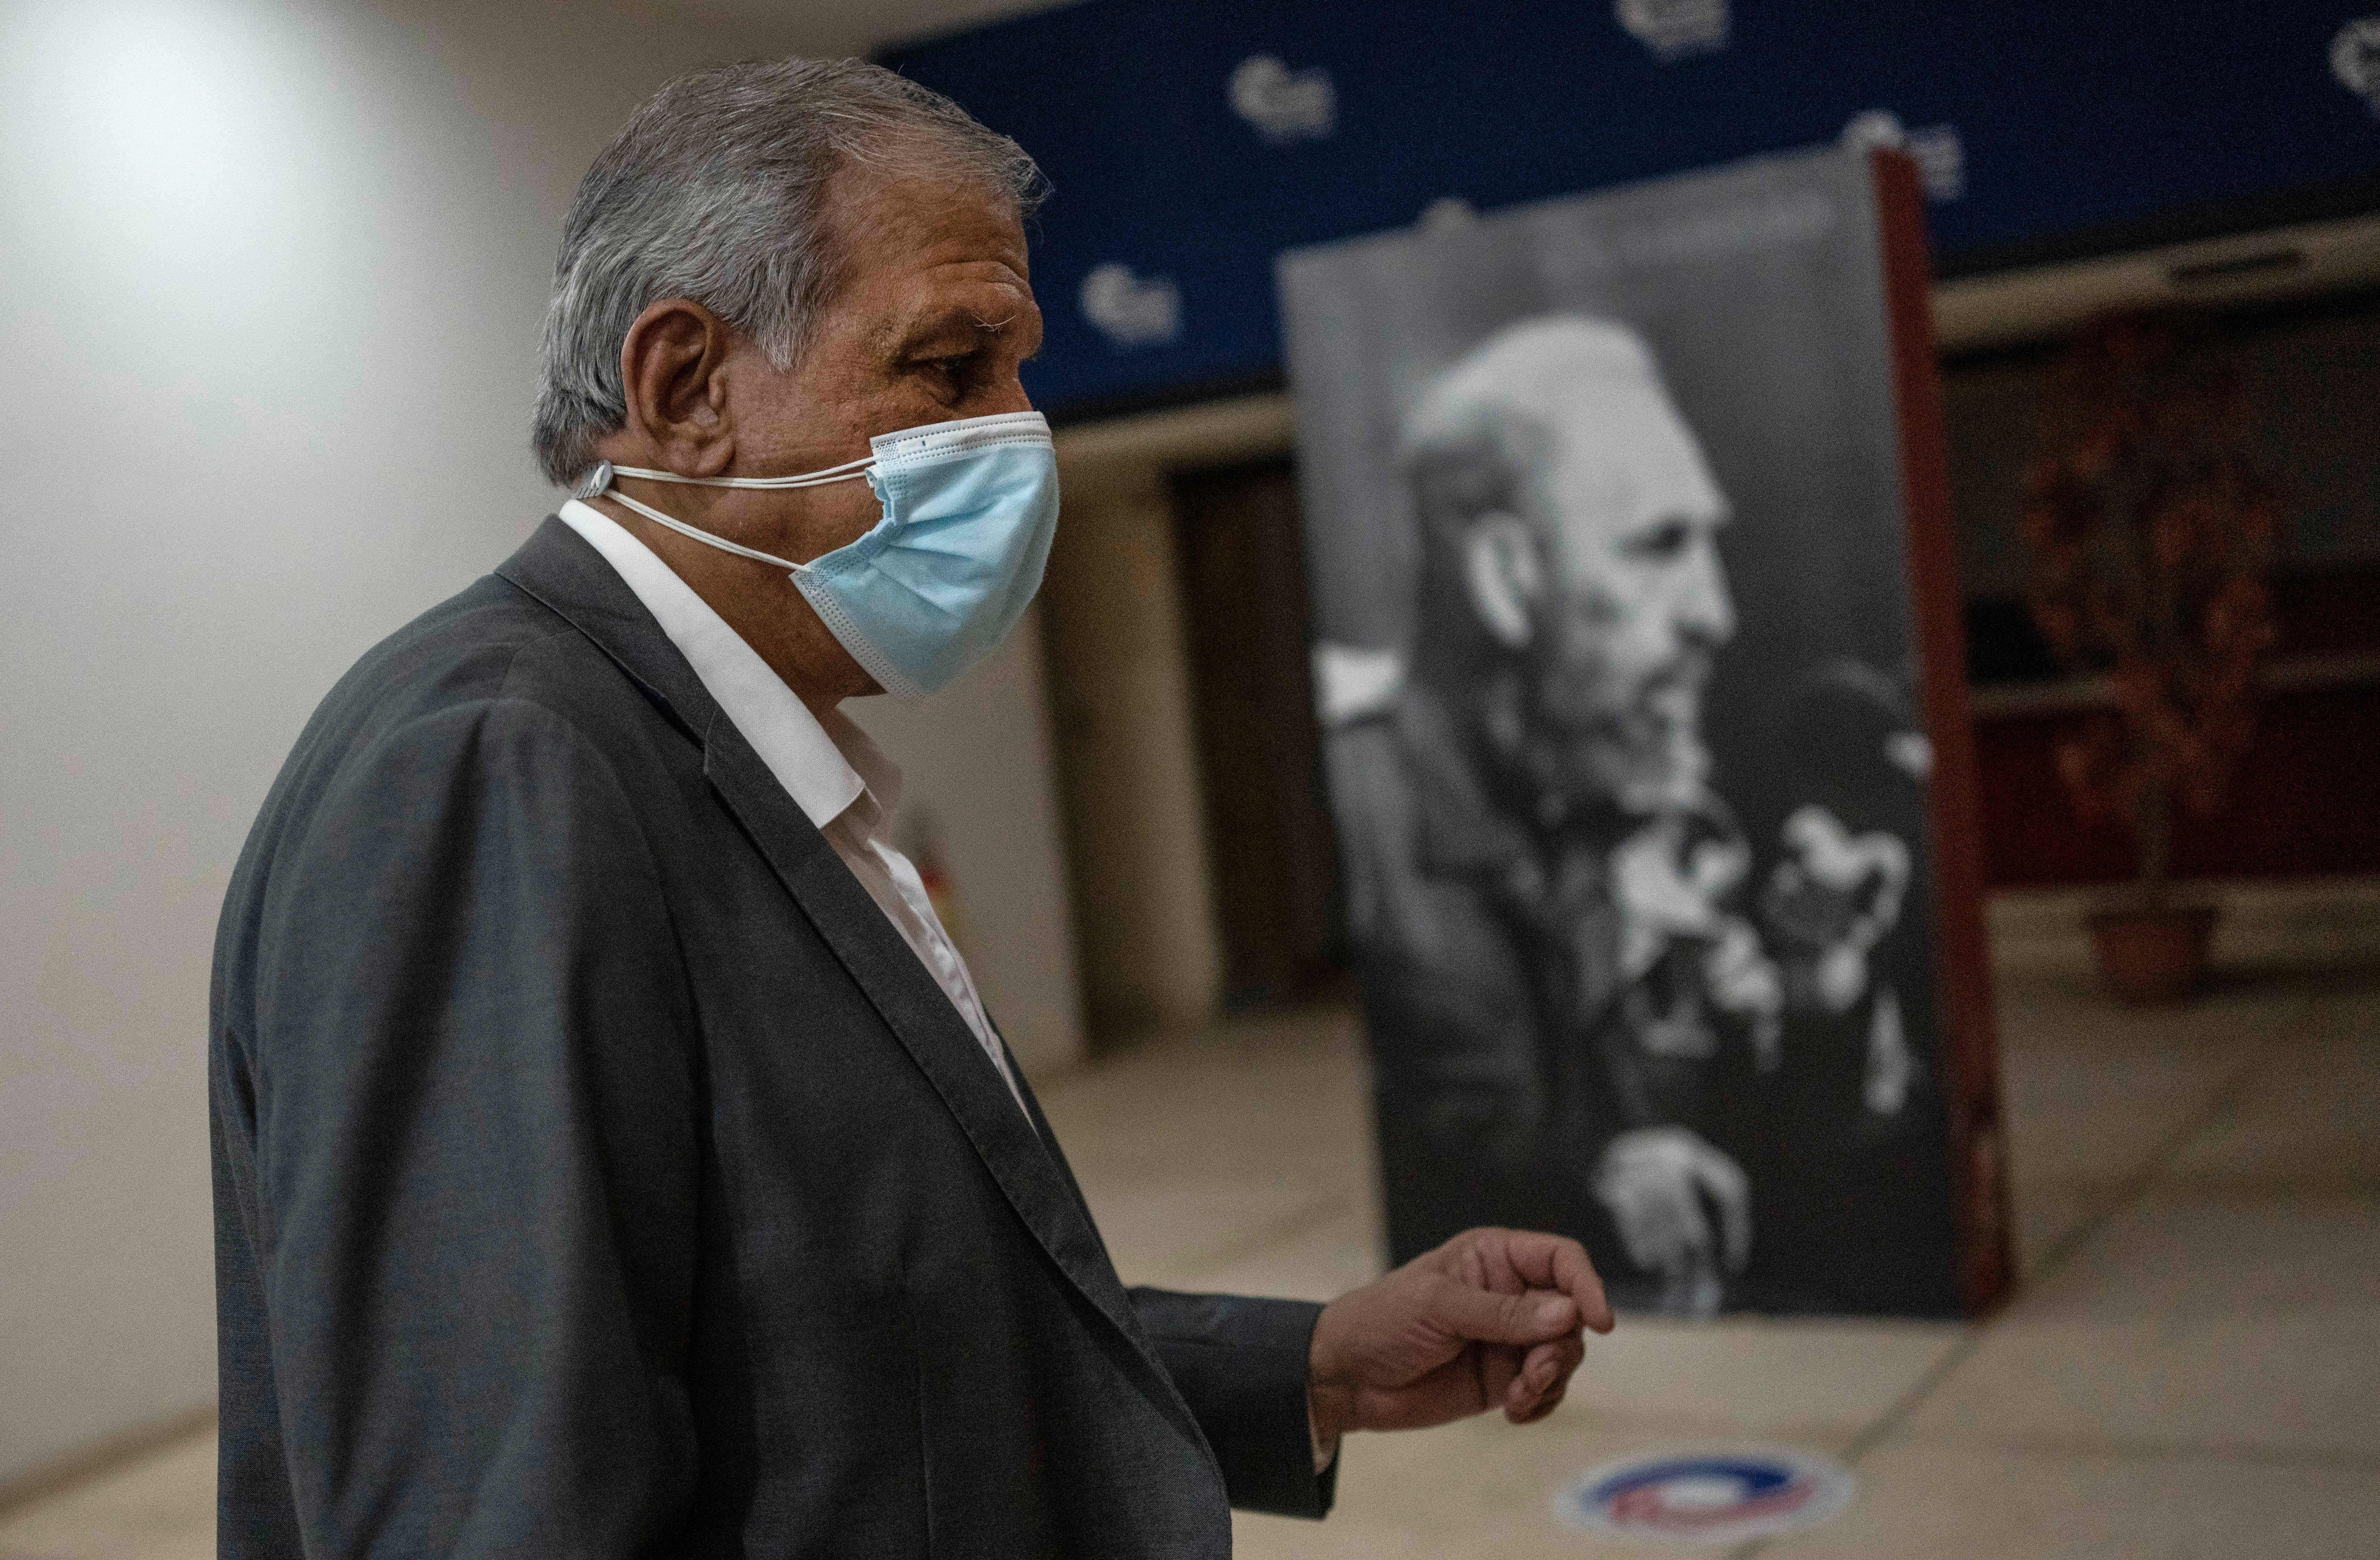 Mitchell Joseph Valdes Sosa, the director of the Cuban Neurosciences Center, walks past a photo of Fidel Castro before a press conference about symptoms of Havana Syndrome